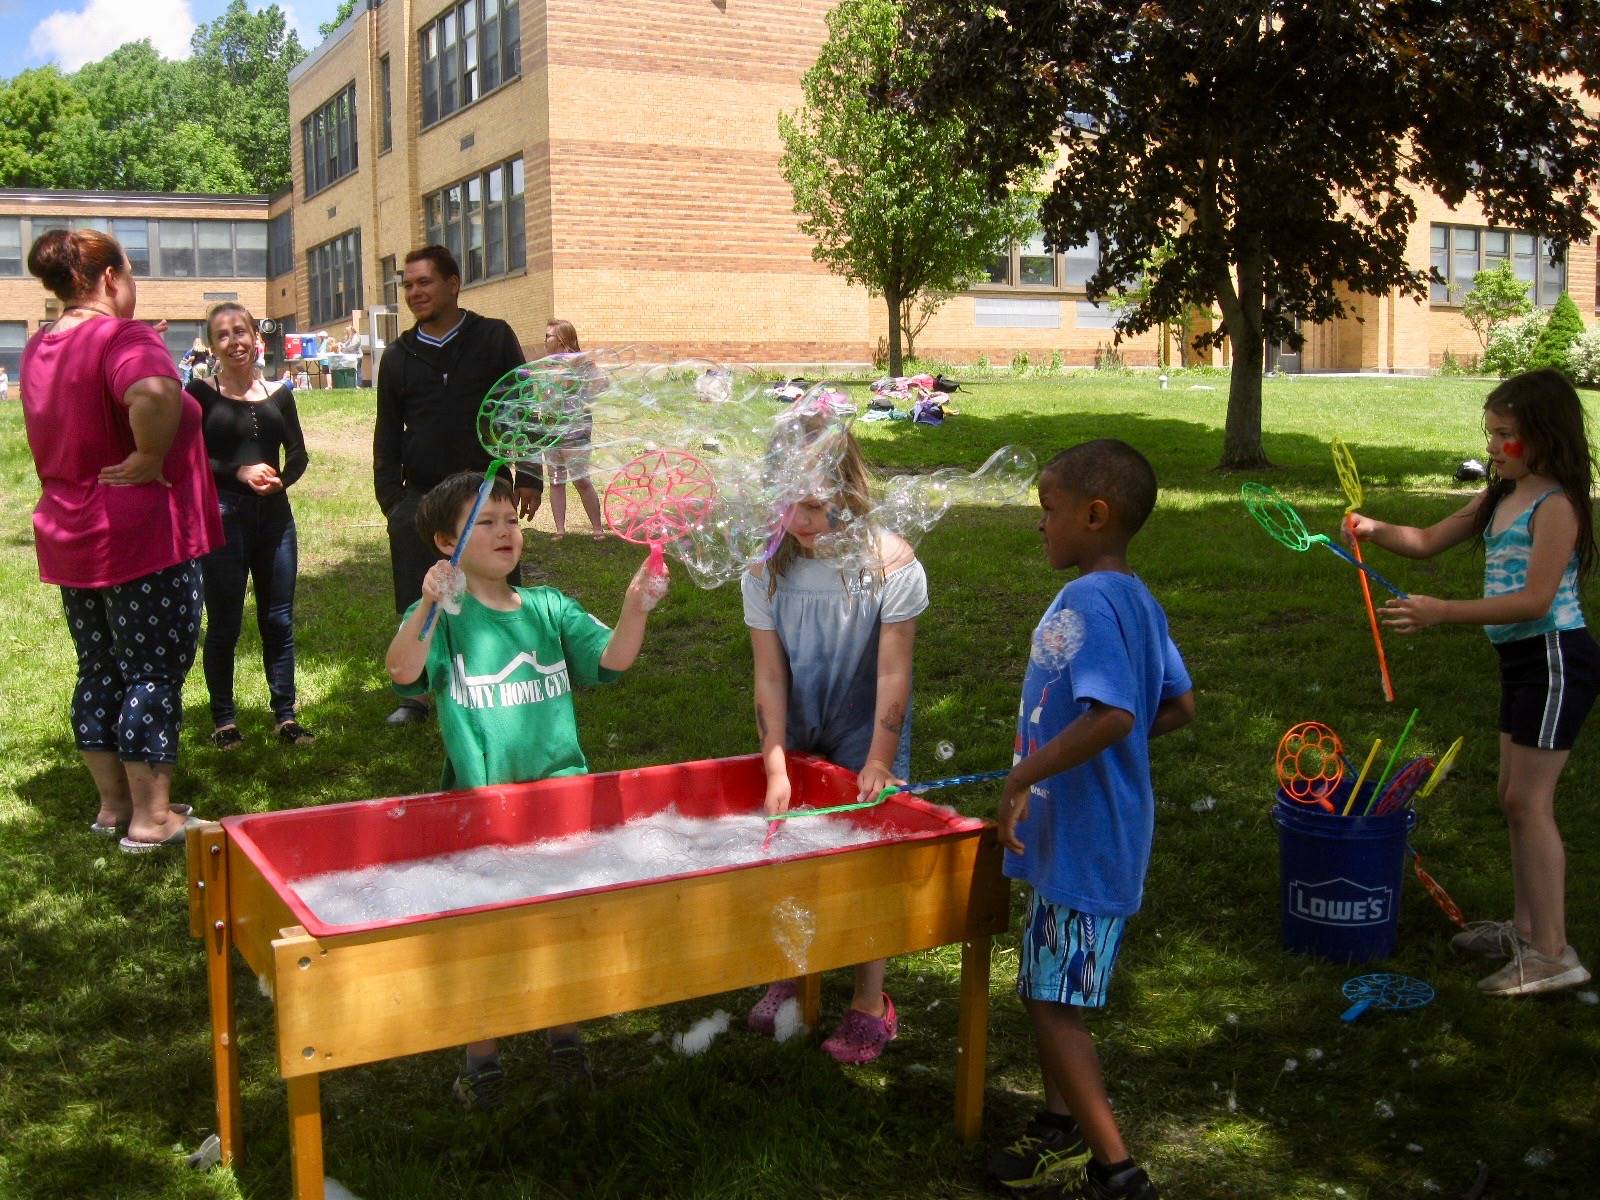 3 Students play with bubbles.